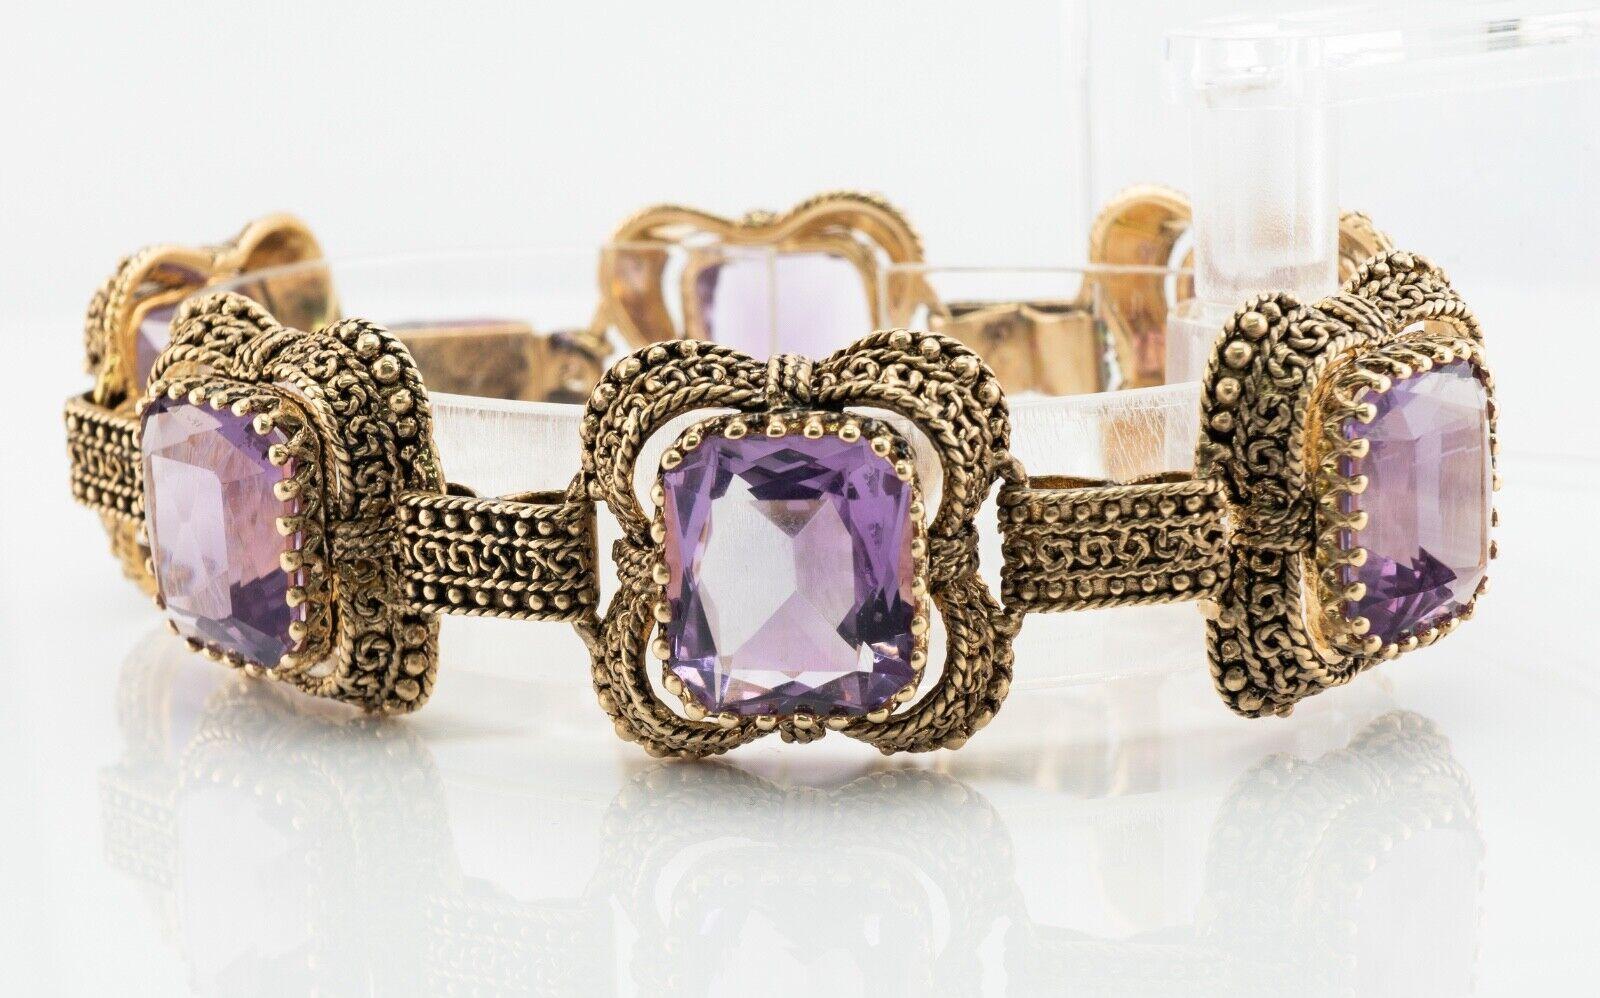 This amazing vintage bracelet is finely crafted in solid 14K Yellow gold (carefully tested and guaranteed), and set with genuine Earth mined Amethysts. There are six clean and transparent Amethyst gemstones measuring 14mm x 11mm each for the total